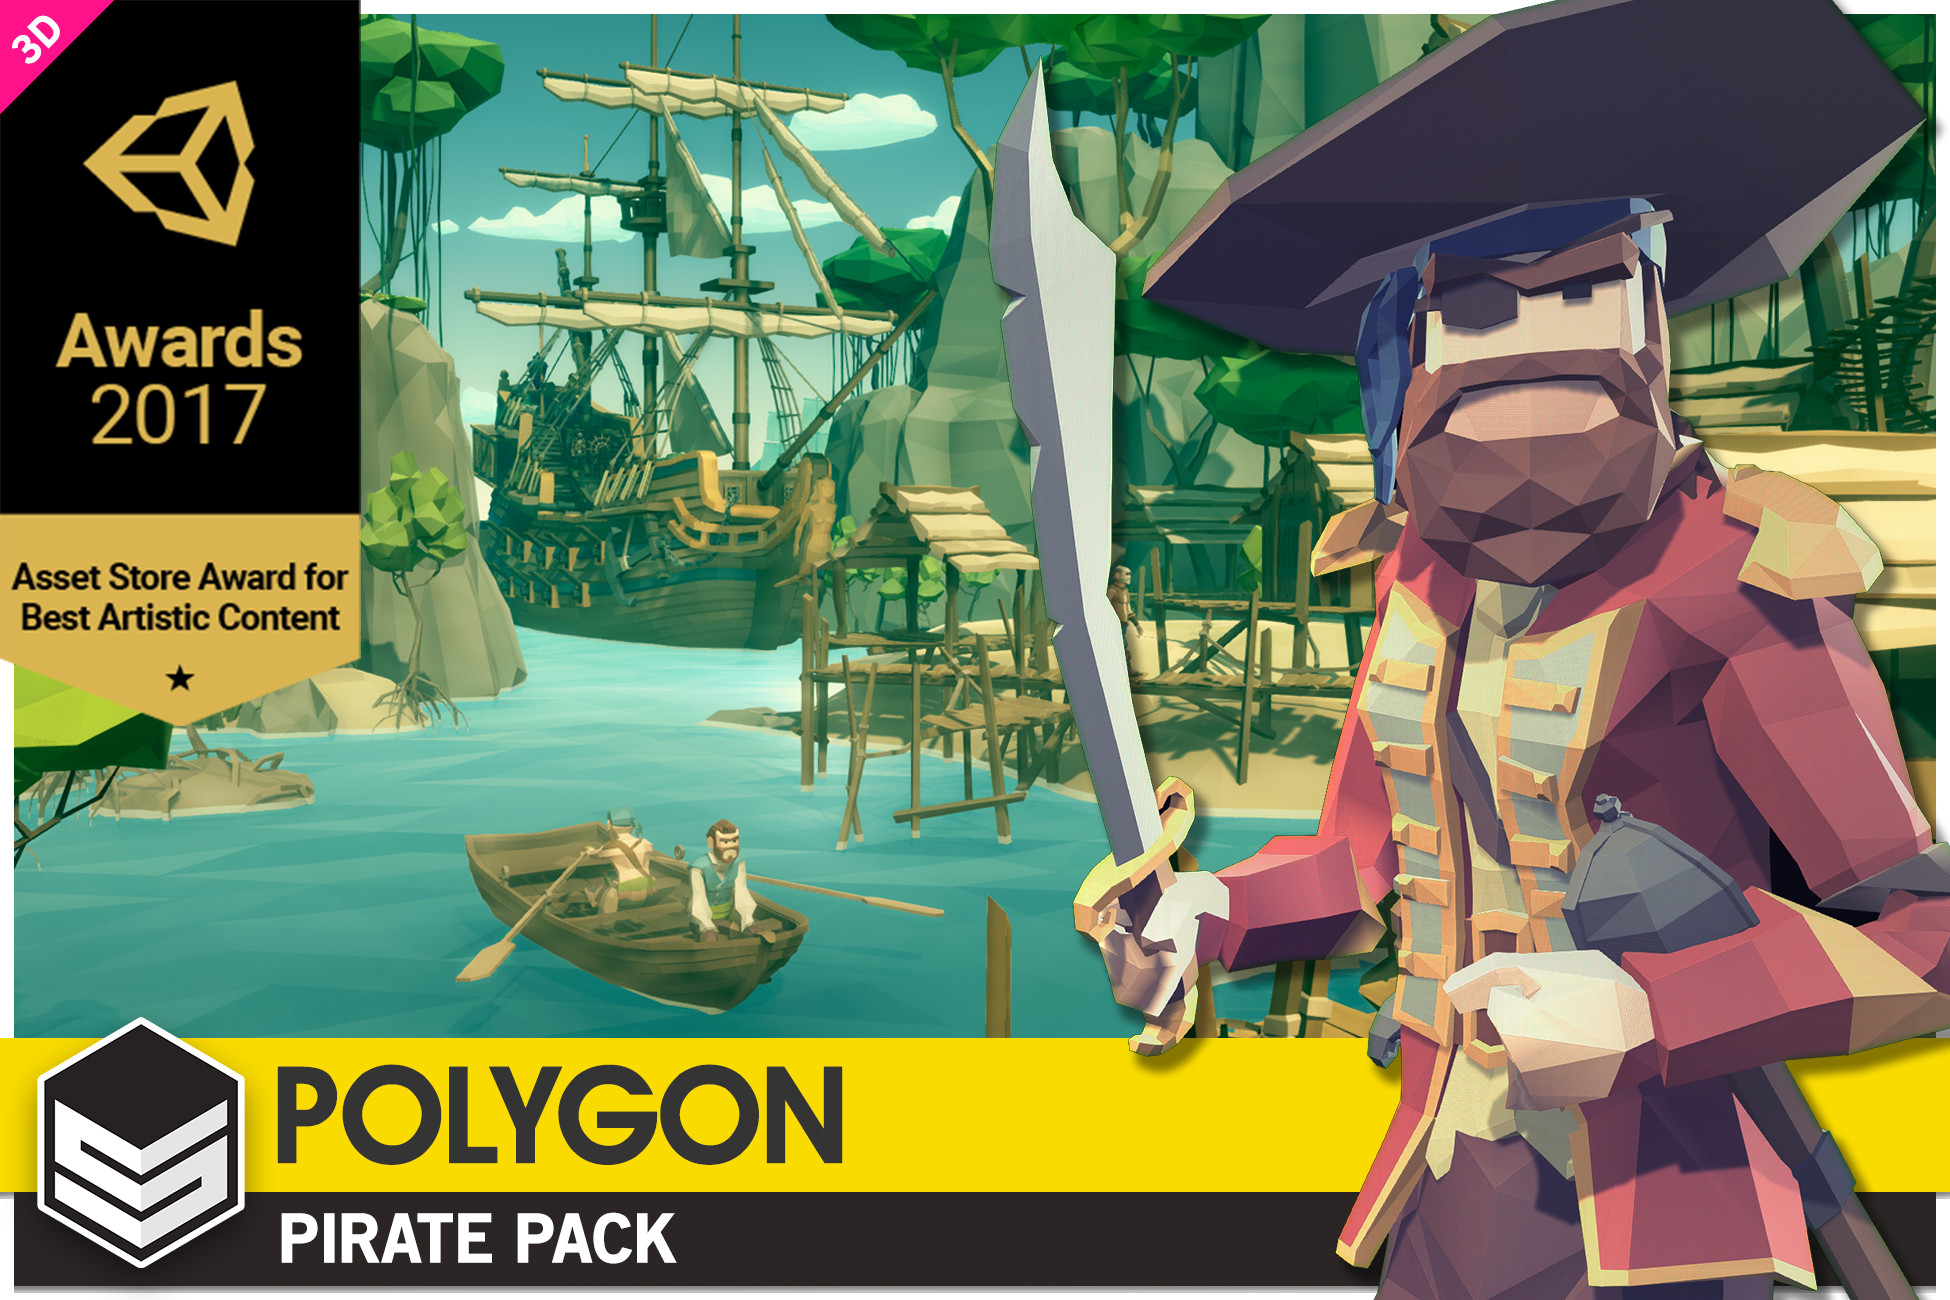 Create your very own polygon style pirate game with this asset pack